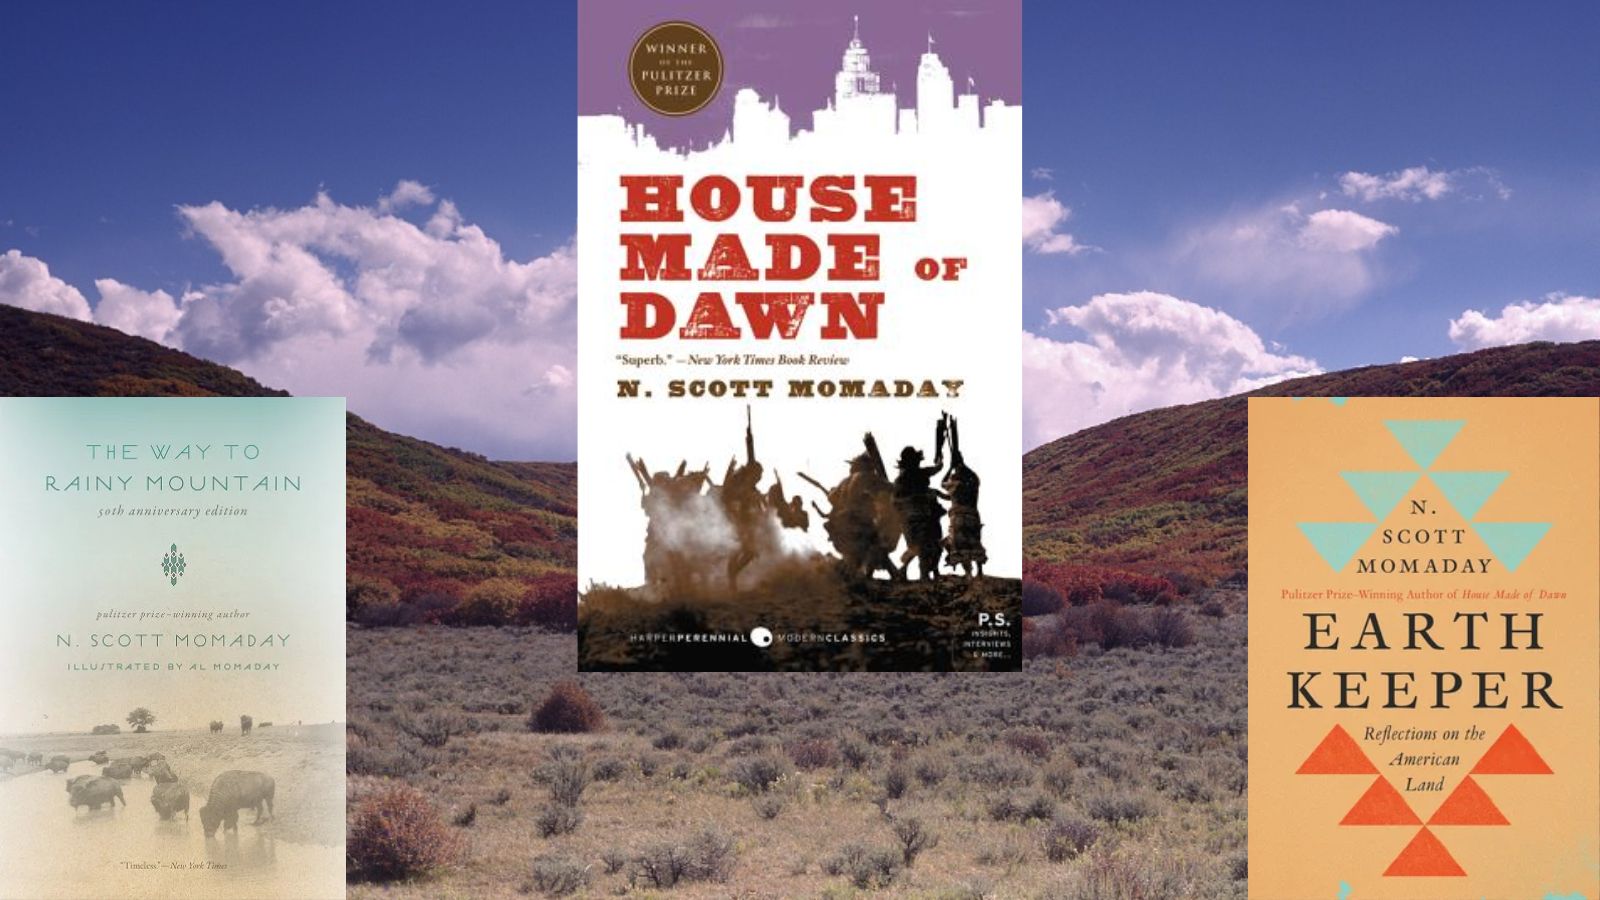 Book covers of "The Way to Rainy Mountain," "House Made of Dawn" and "Earth Keeper" on desert background